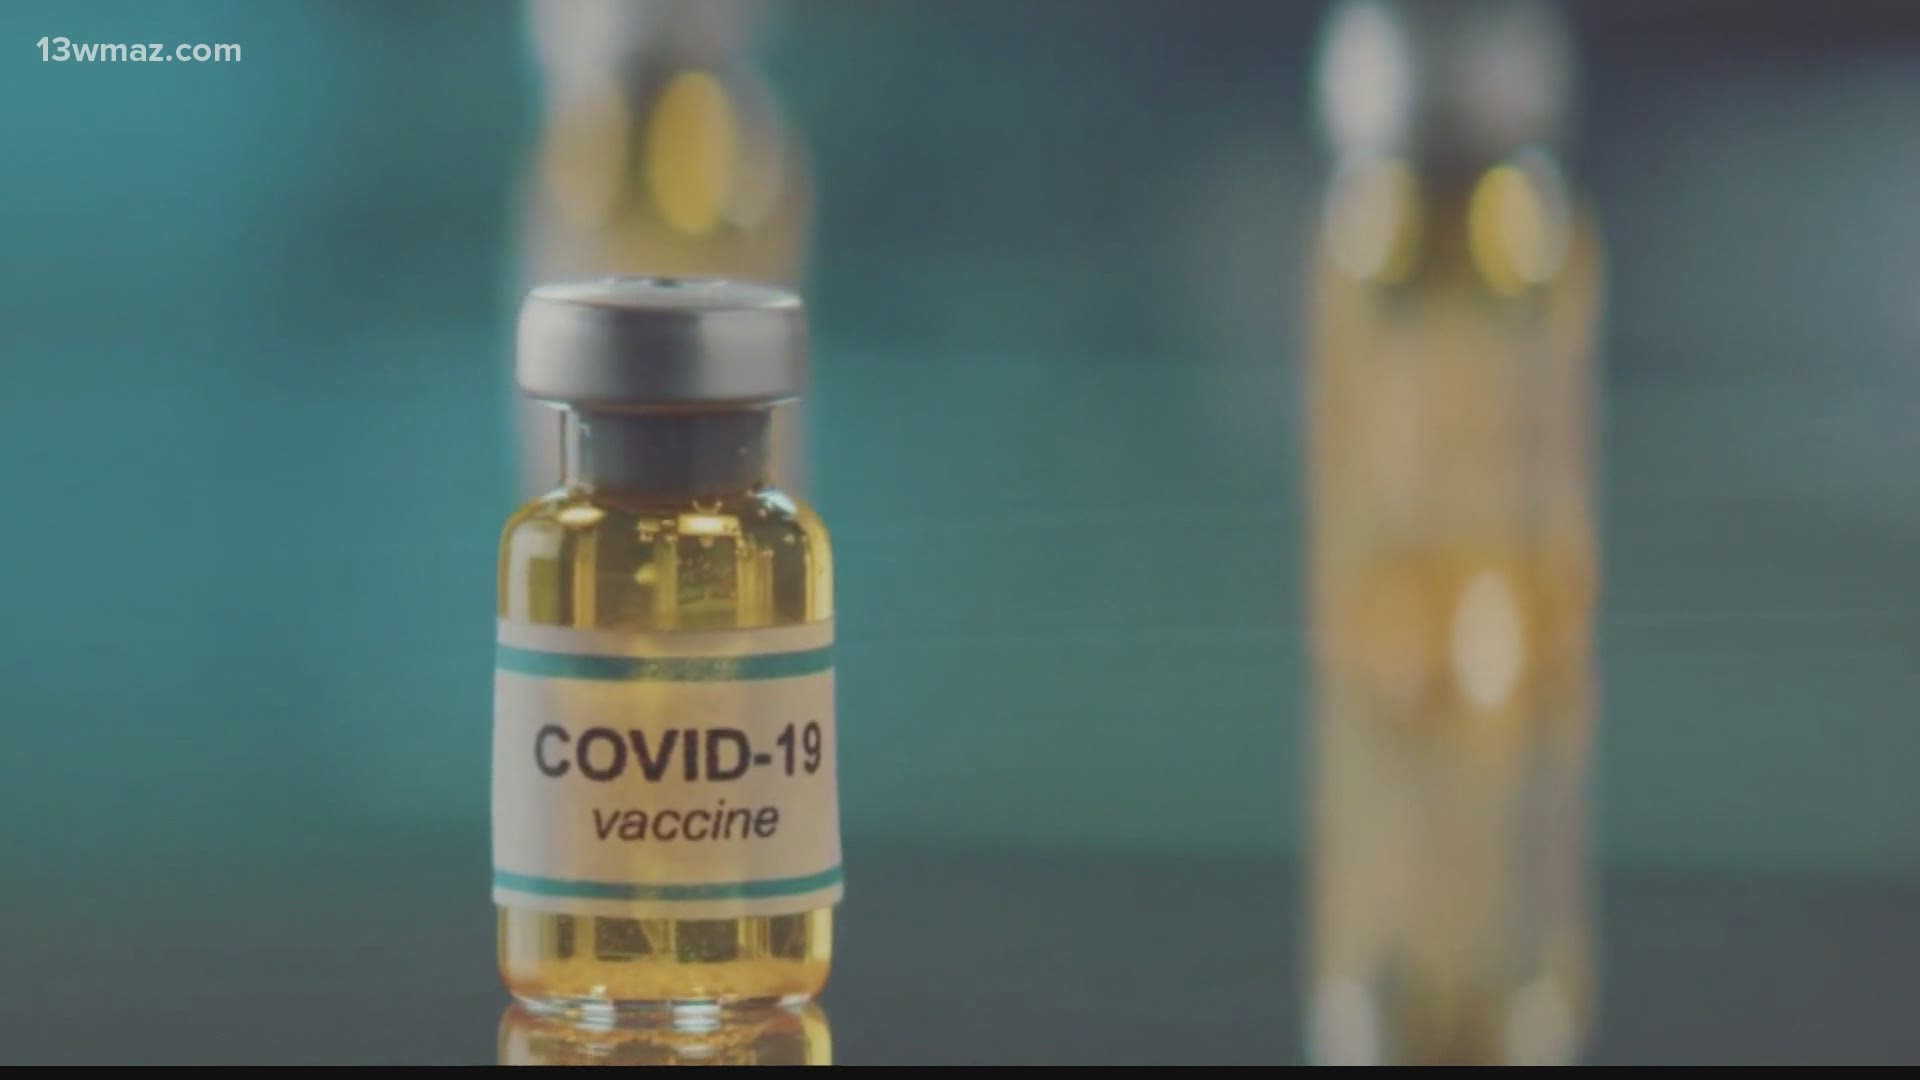 While the rollout of the coronavirus vaccine is going slower than federal leaders hoped, some people in Laurens County will get the Moderna vaccine next week